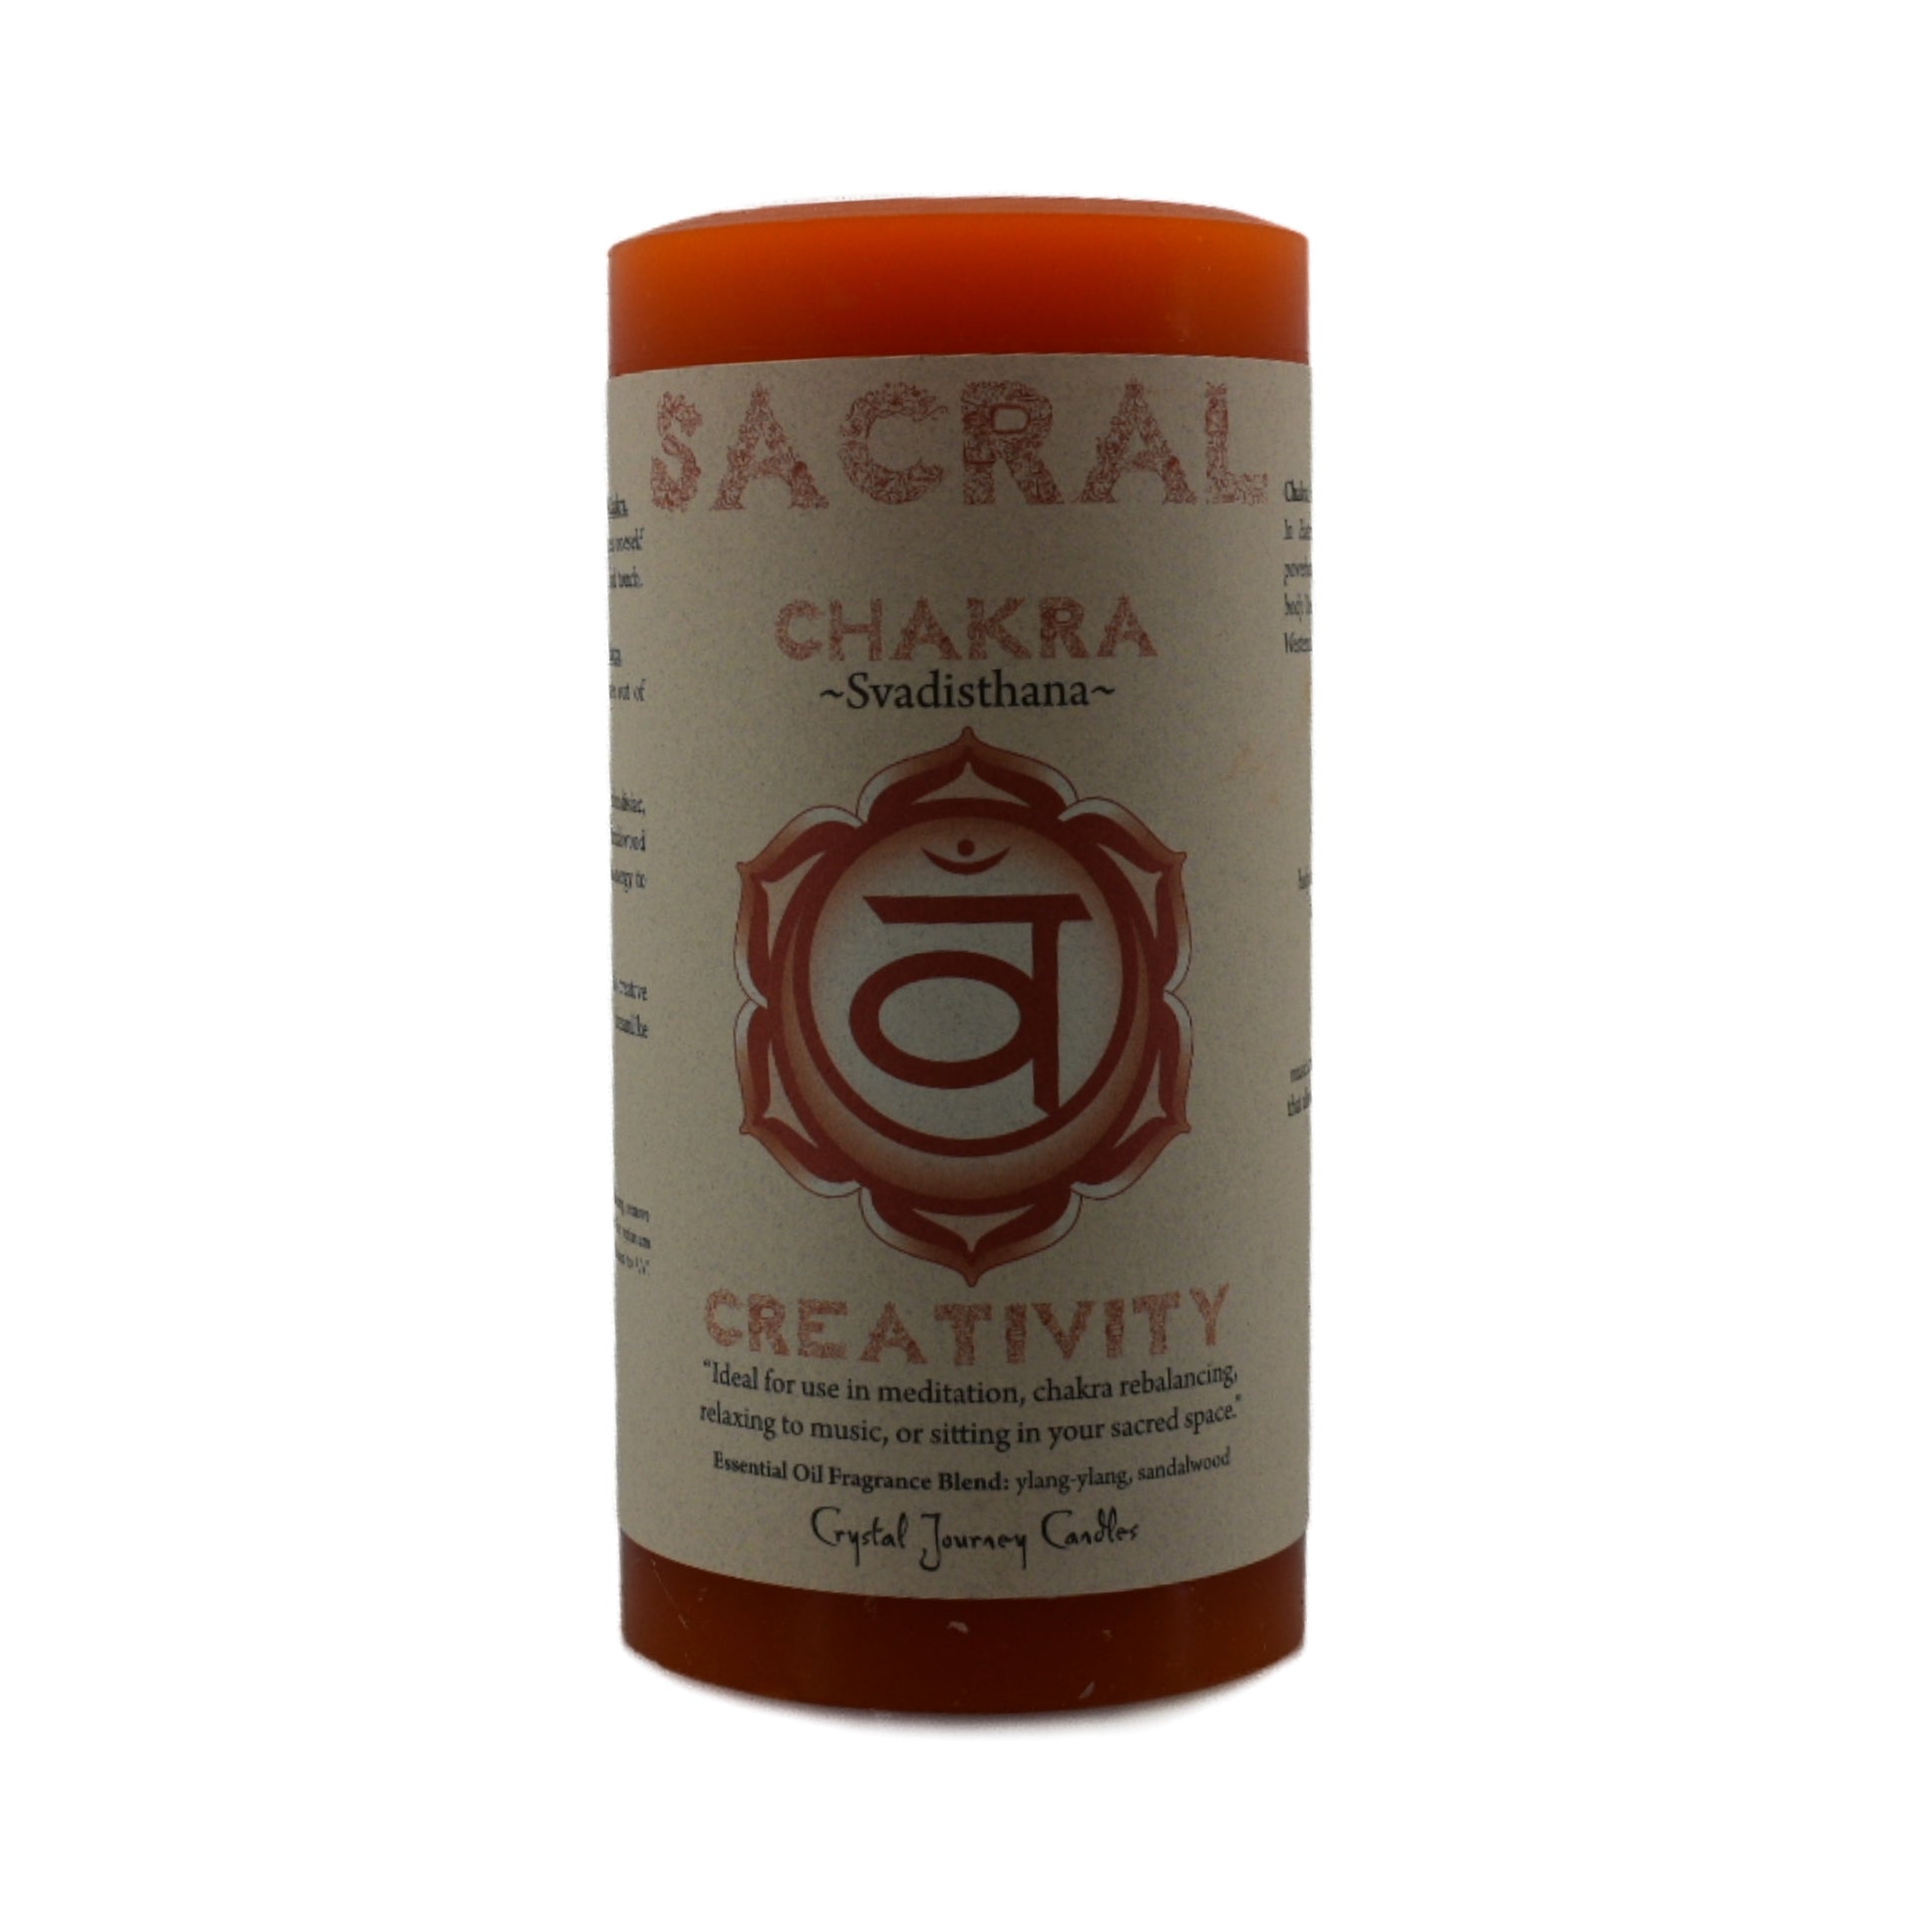 Sacral Chakra Pillar Candle xl.  3x6 inch orange pillar candle is infused with Ylang Ylang and Sandalwood essential oils.   Use this candle to enhance creativity.